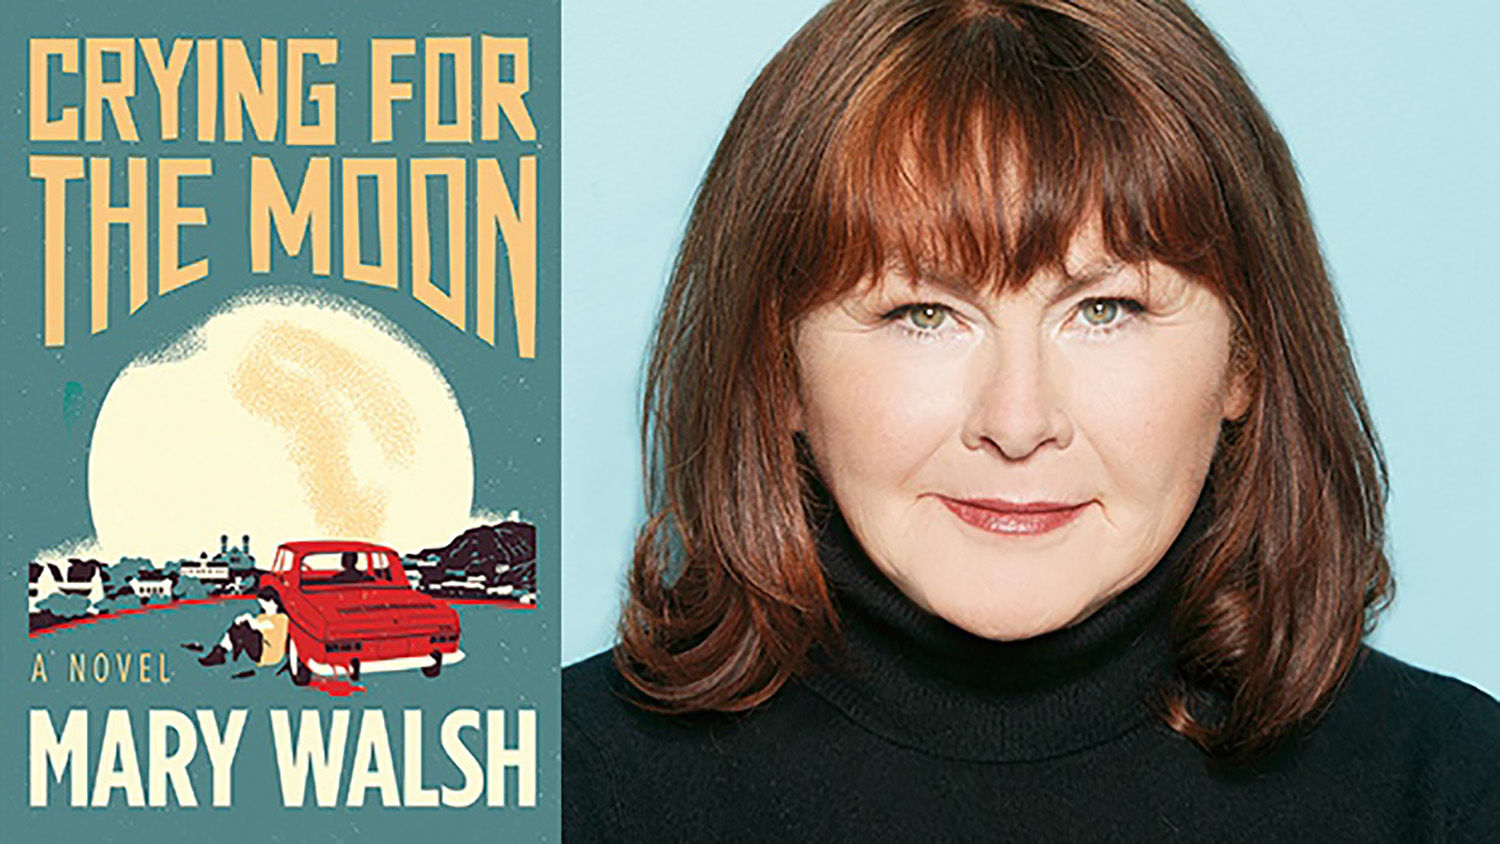 Crying for the Moon by Mary Walsh